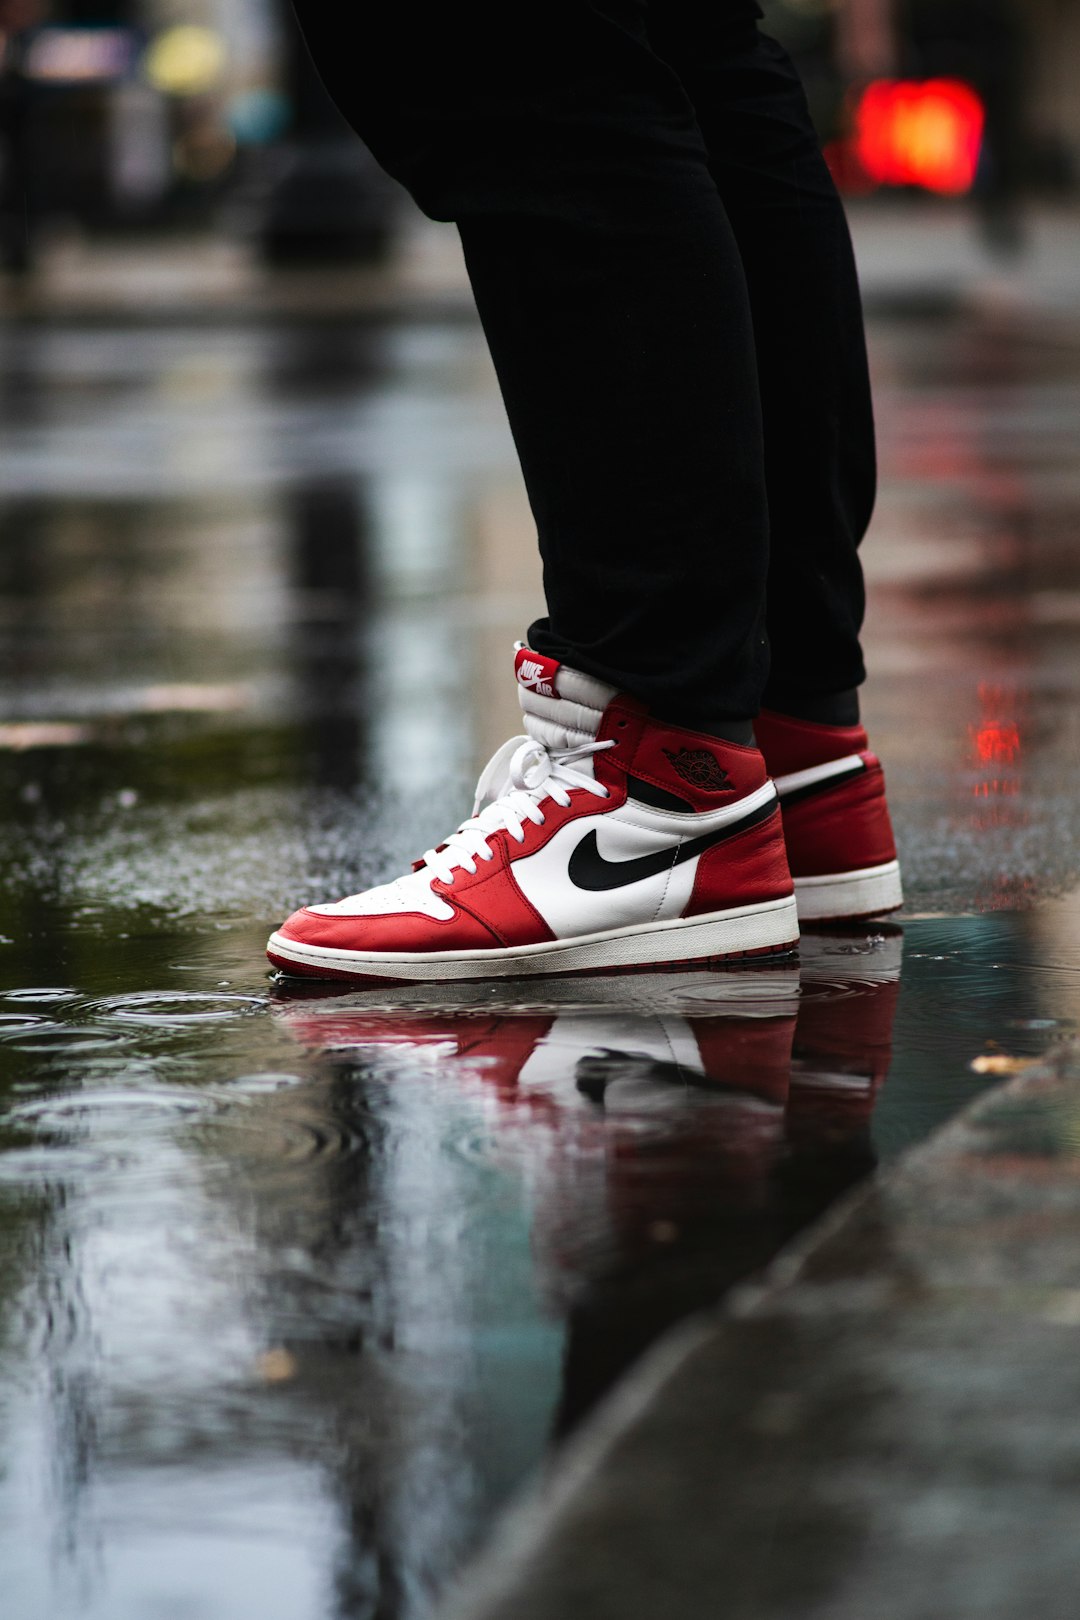 selective focus photography of person wearing white-red-and-black Air Jordan 1's Chicago